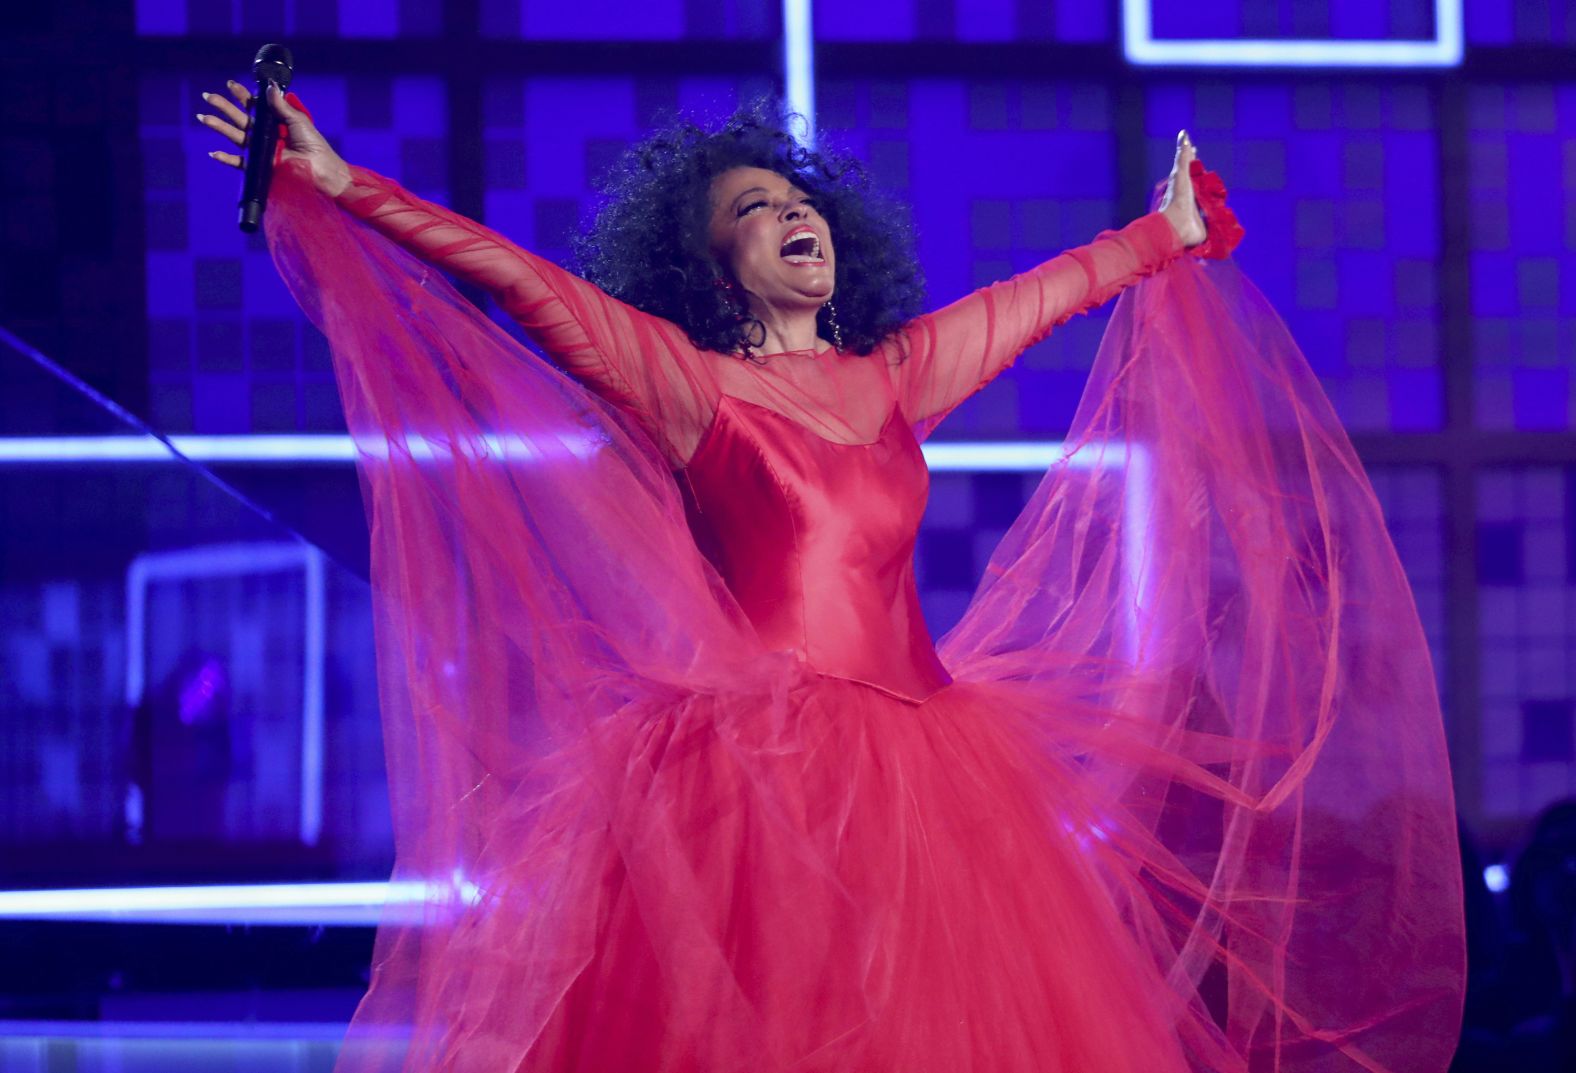 Diana Ross showed that she's still got it, performing "The Best Years of My Life" and "Reach Out and Touch (Somebody's Hand)."